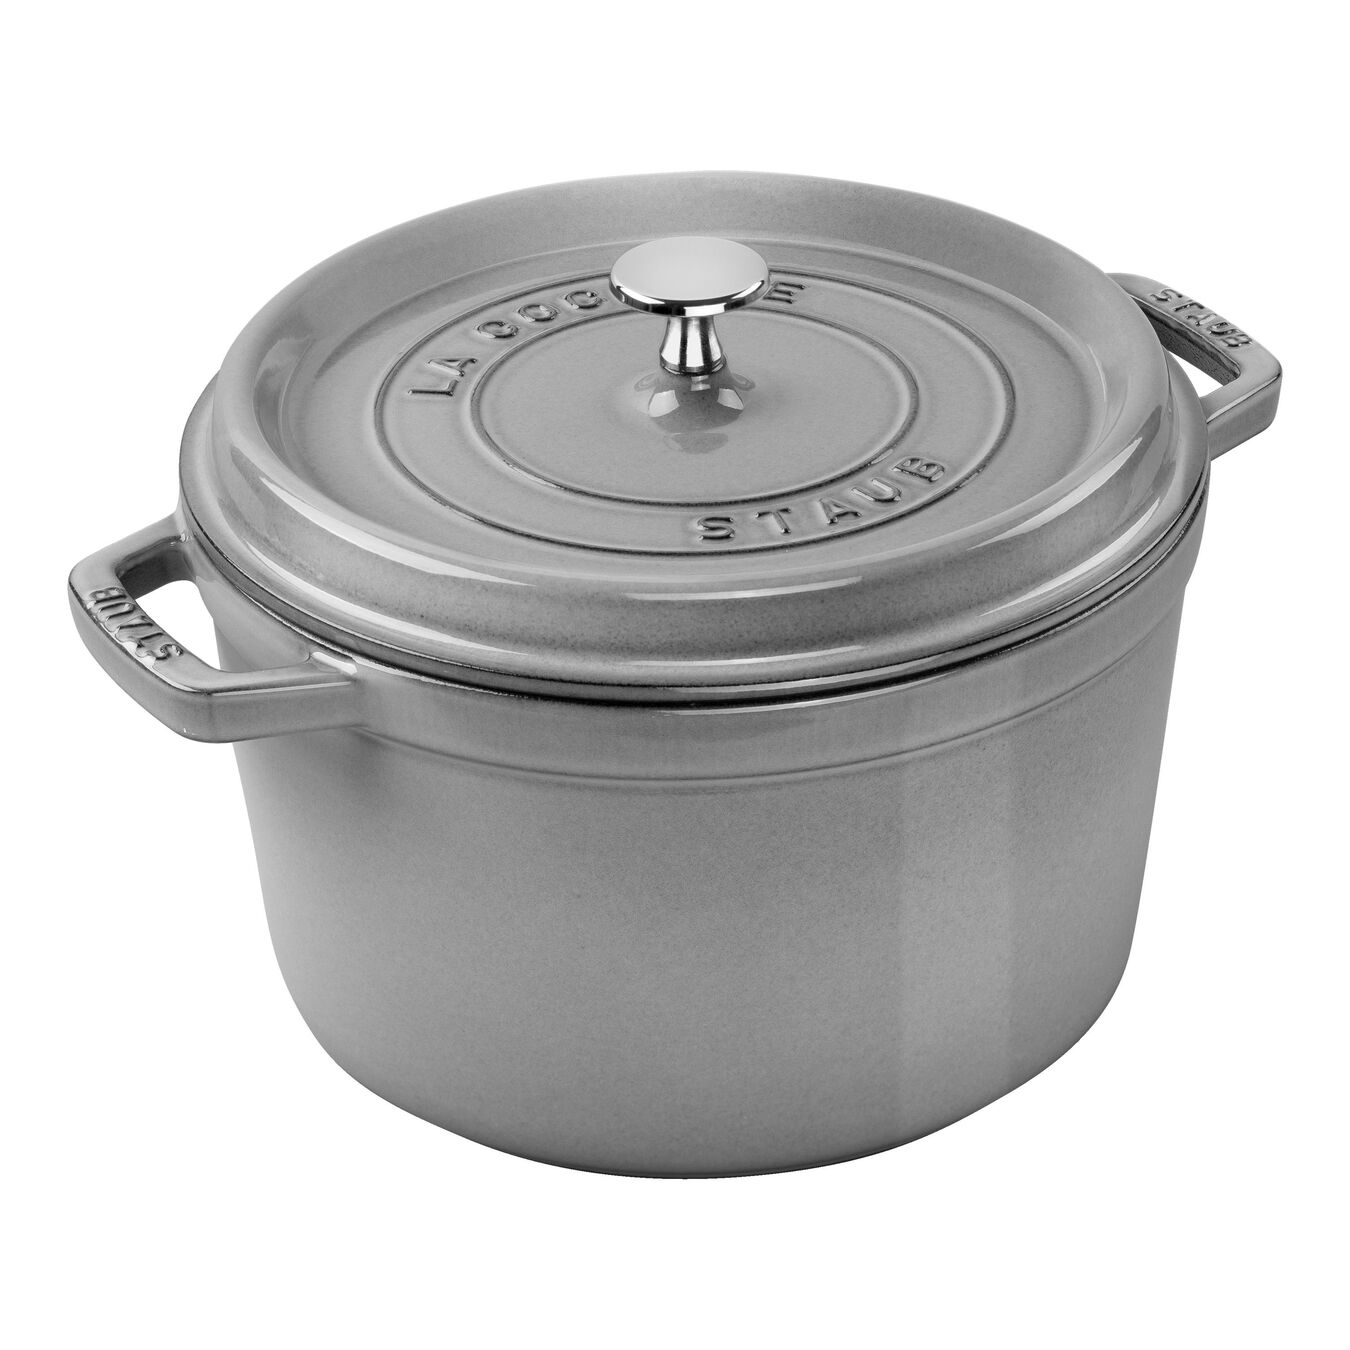 5 qt, round, Cocotte deep, graphite grey - Visual Imperfections,,large 1